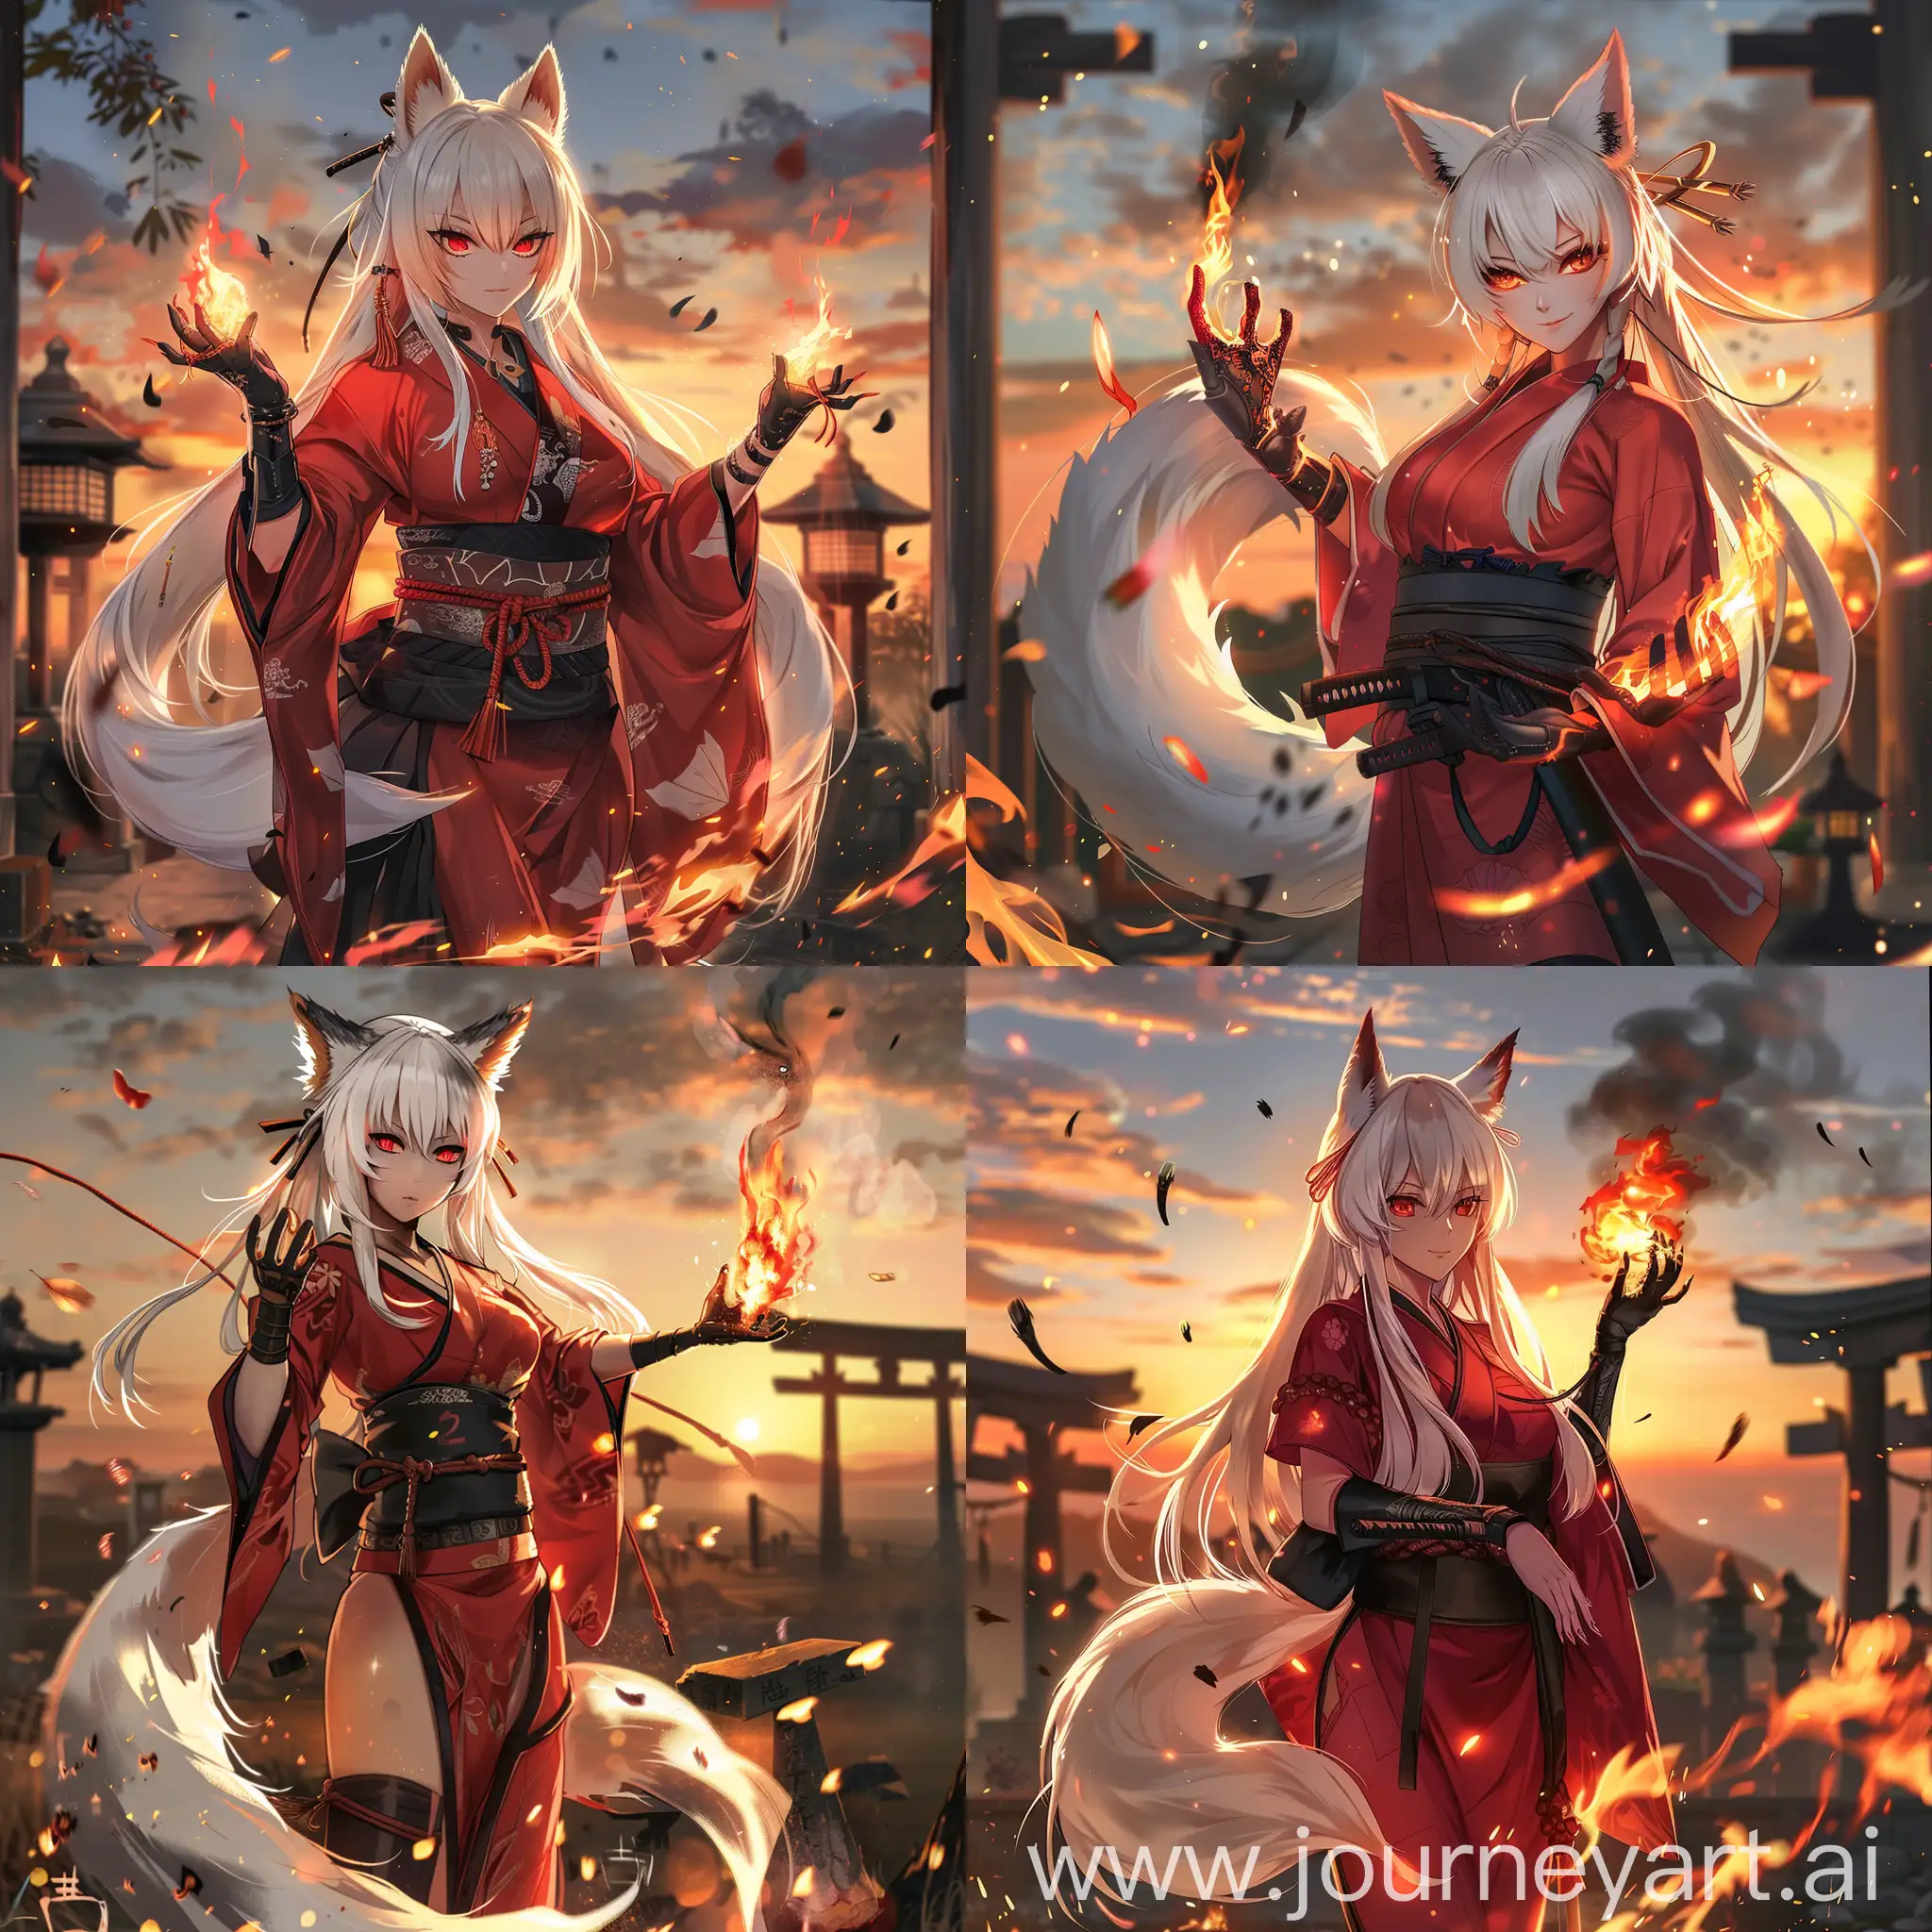 anime-style, full body, athletic, beautiful, tan skin, asian woman, long white hair, white fox ears, white fox tail attached to her waist, fiery red eyes, wearing a red kimono, black hakama, black sash, long black gloves, black leather boots, casting fire magic, hands wrapped in fire,  good anatomy, dynamic, embers falling in foreground, shinto shrine, sunset